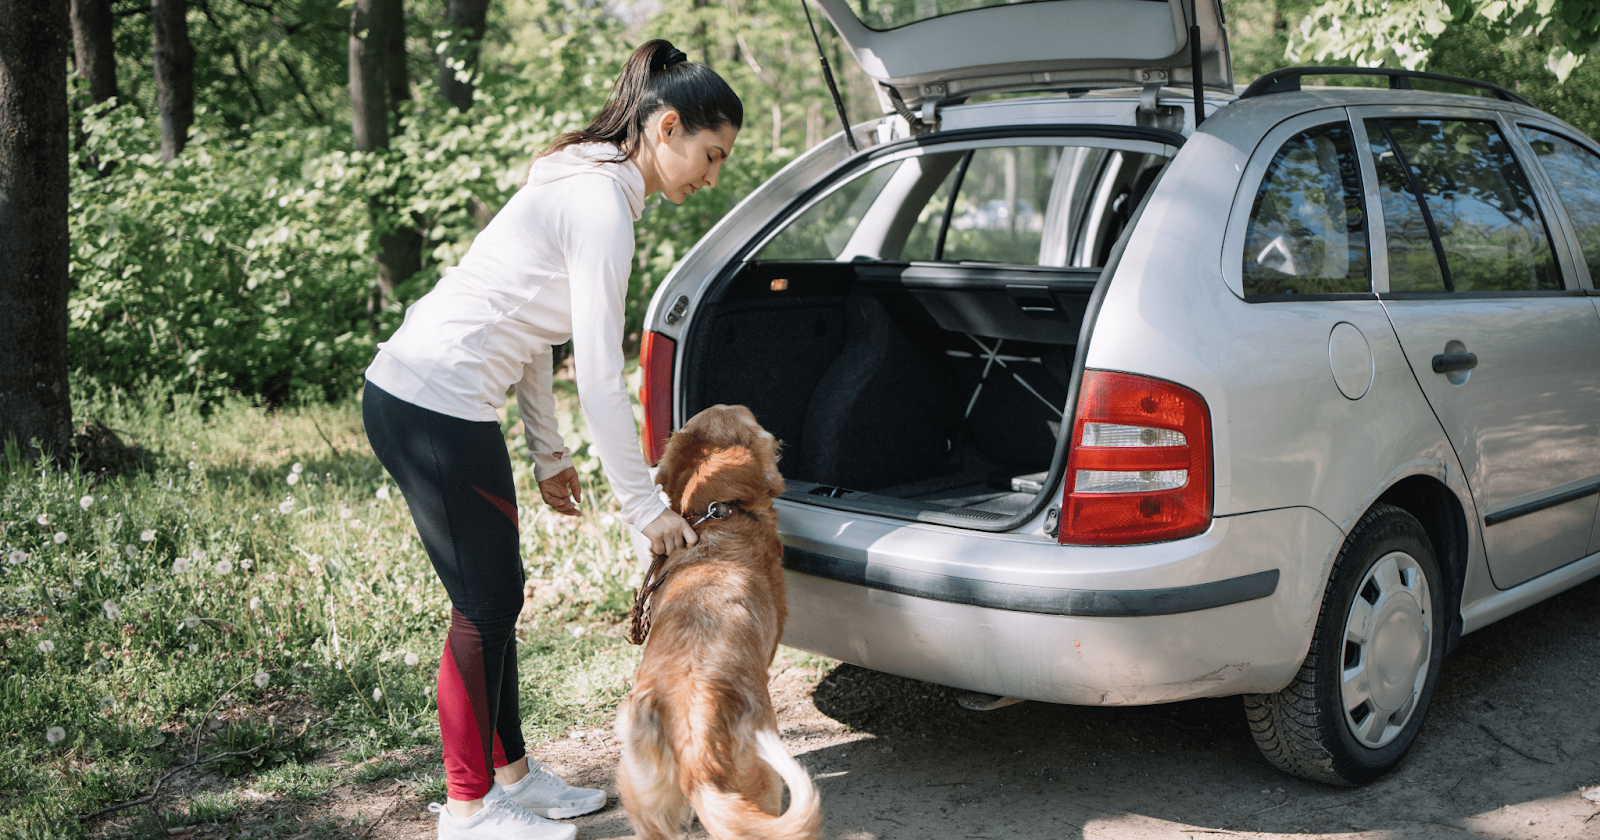 Woman standing next to seated dog waiting to get into the trunk of a car